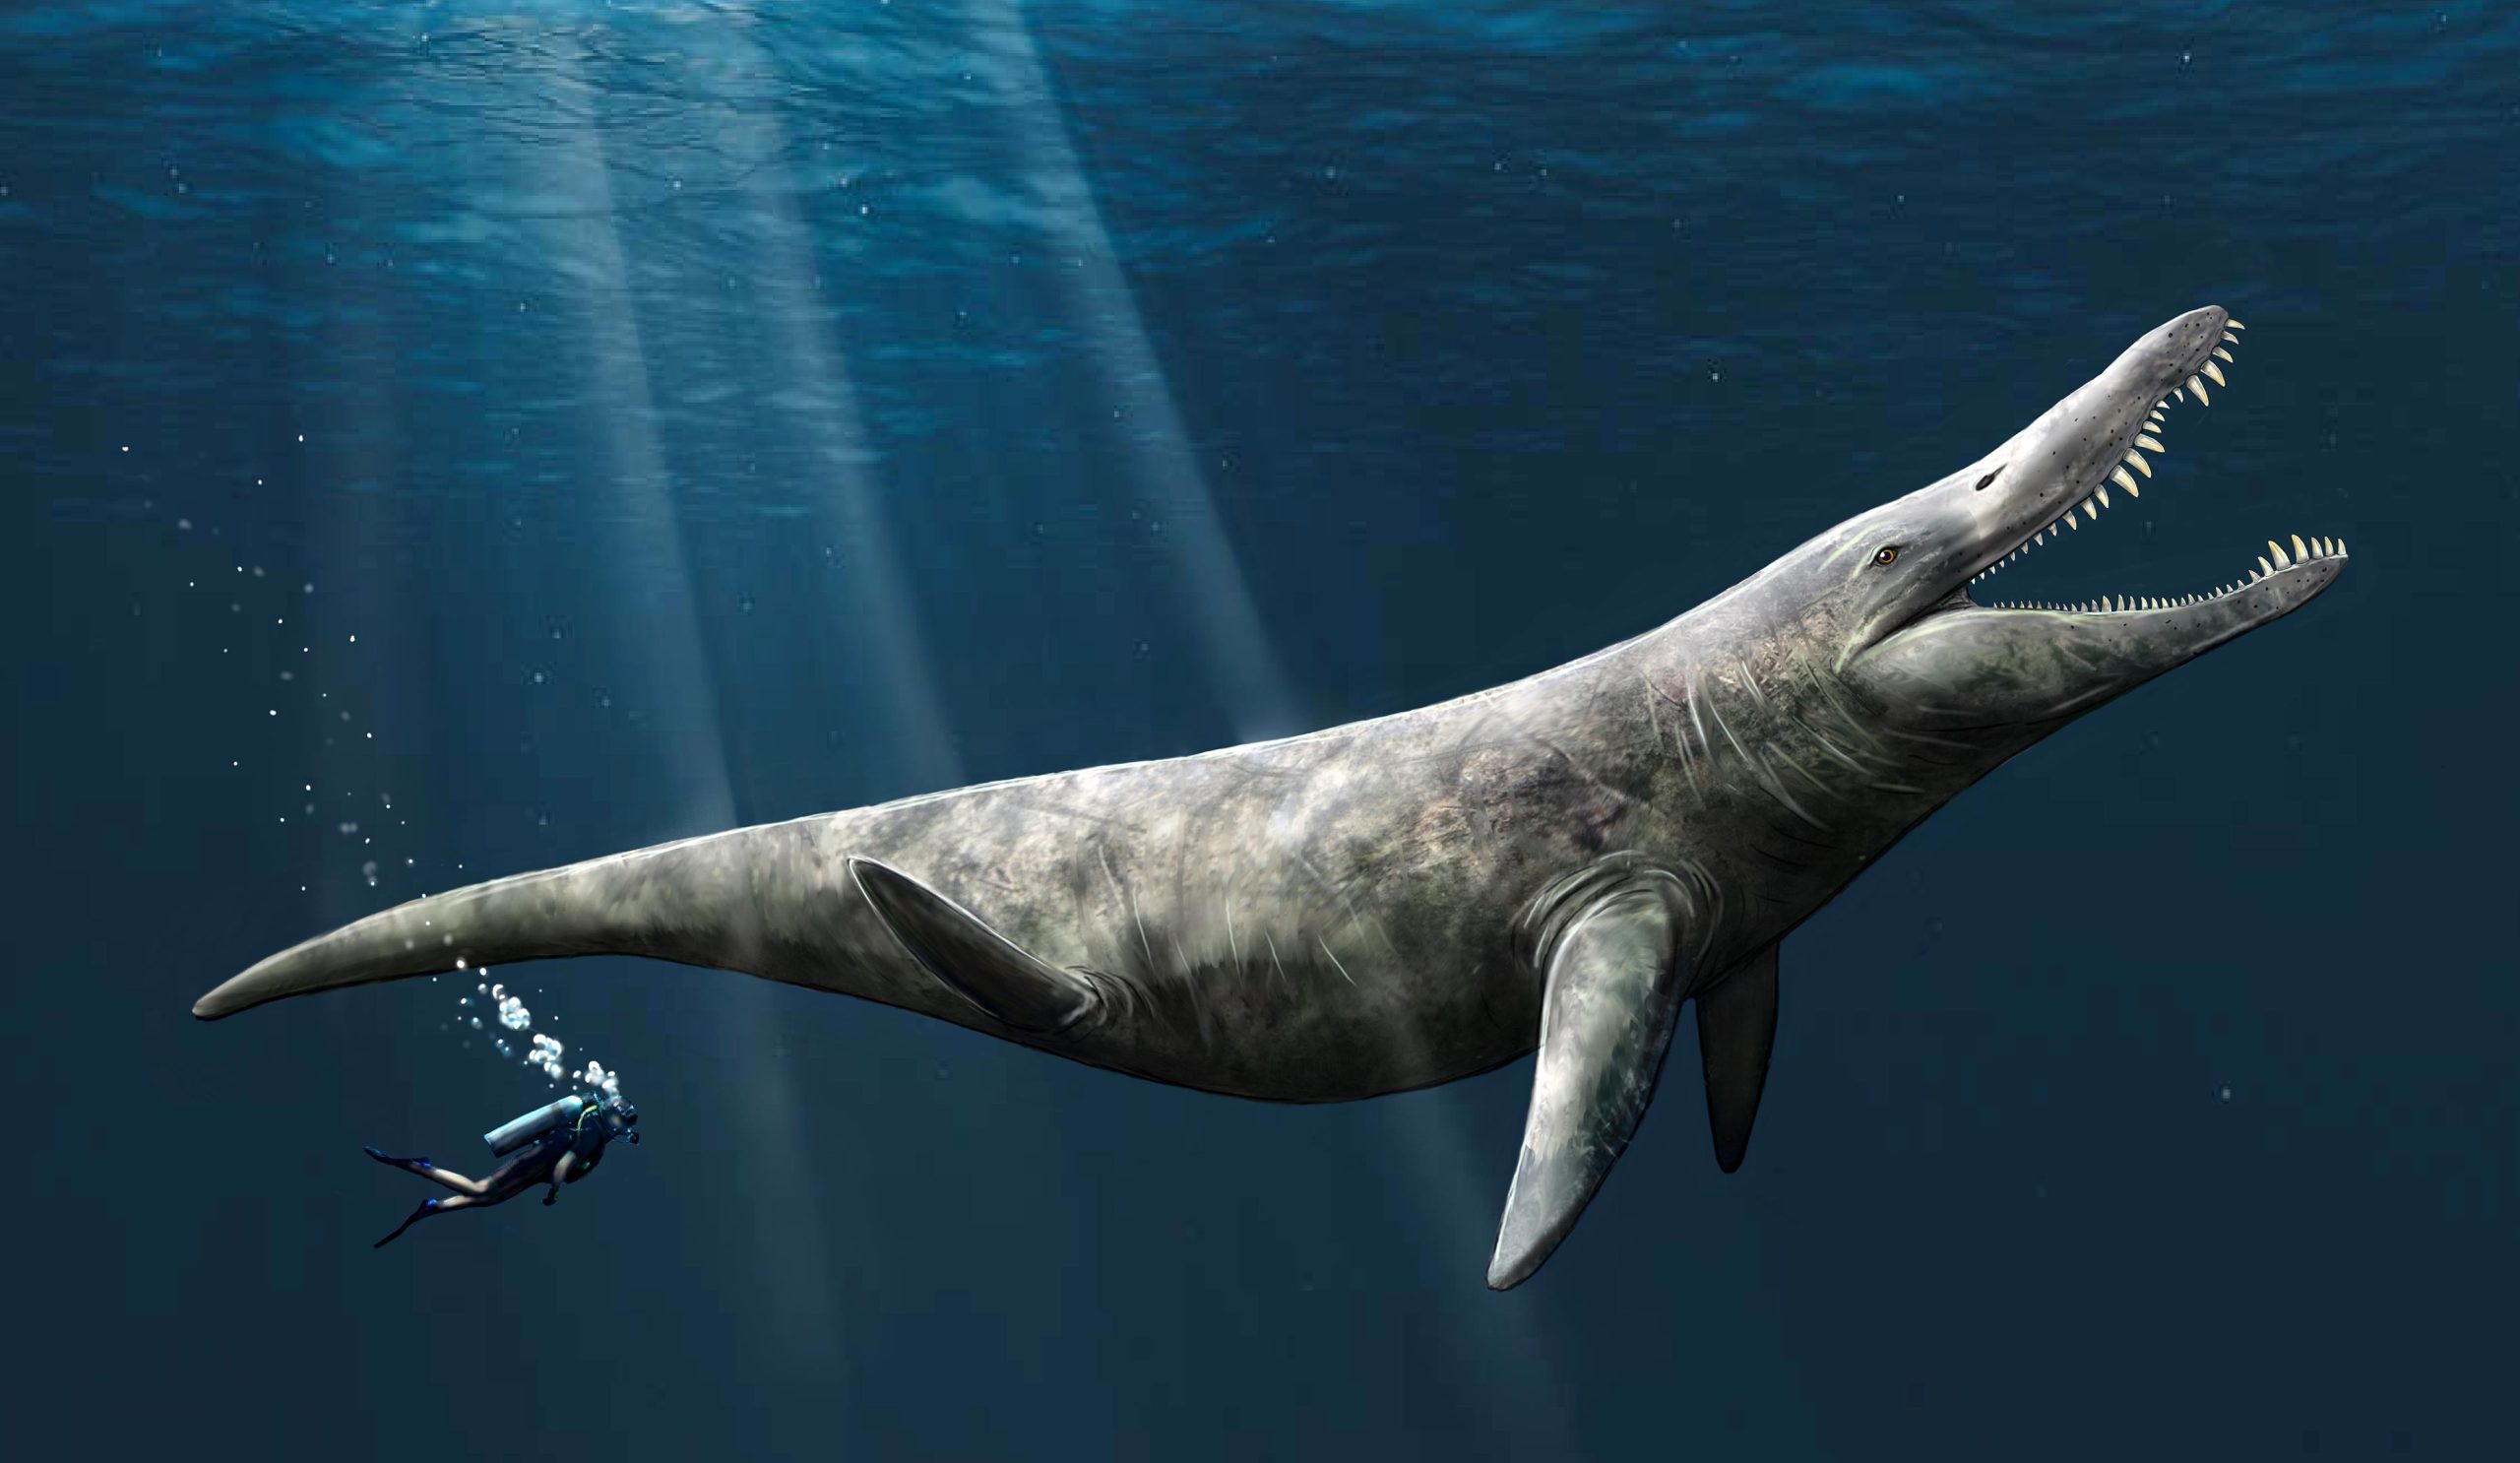 The marine monsters of the Jurassic seas were twice as large as killer whales